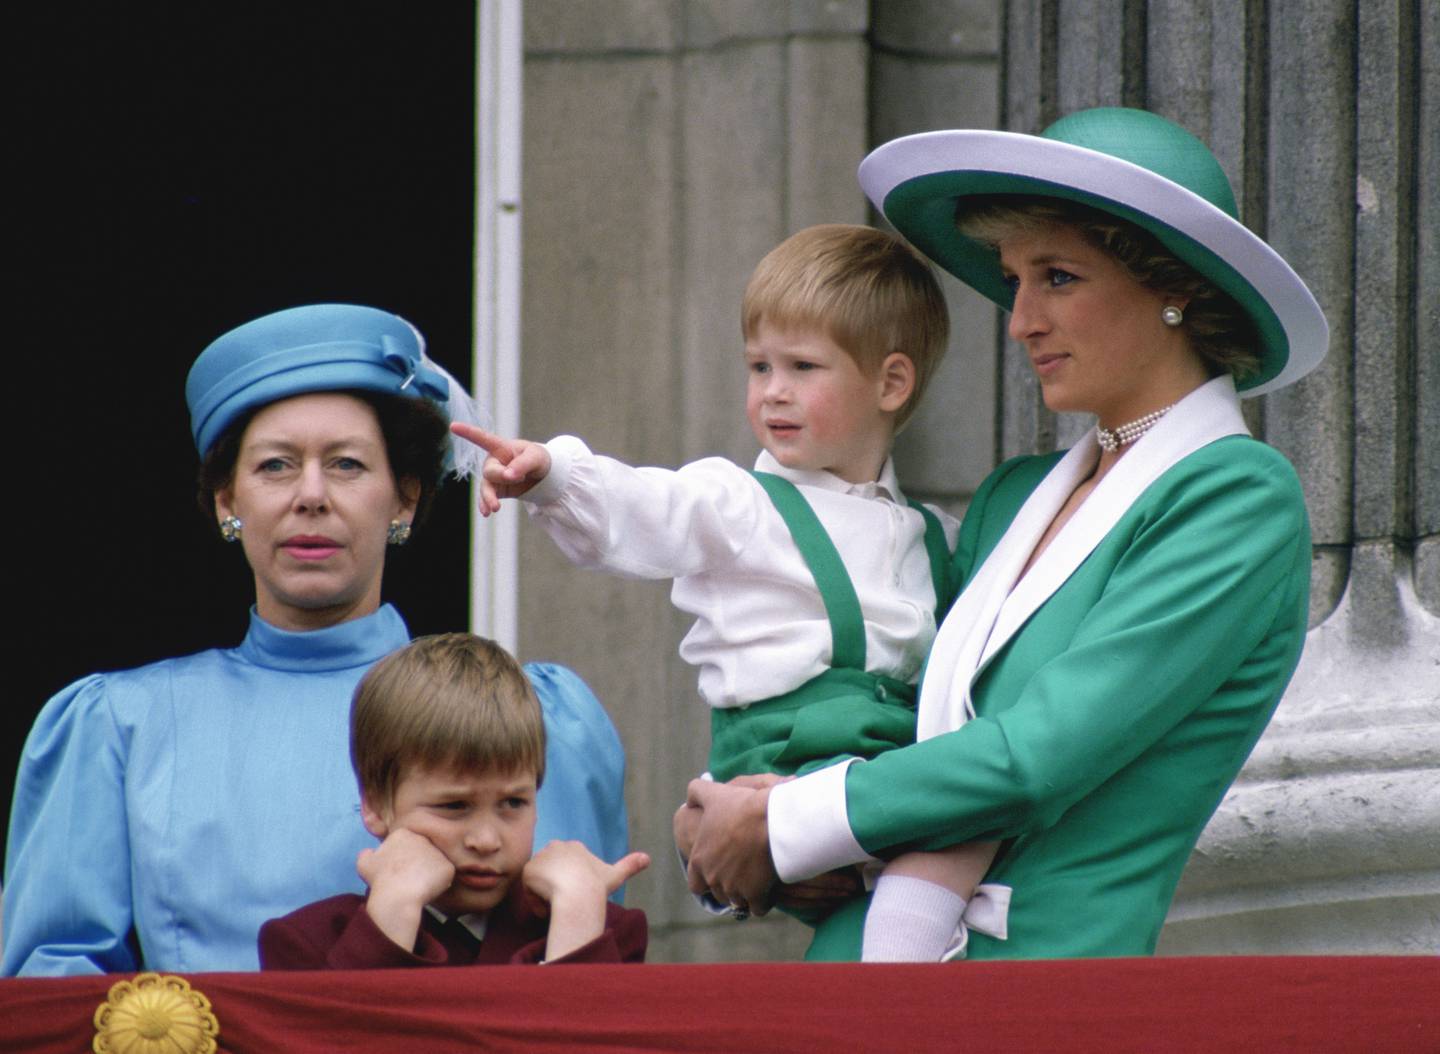 Princess Diana holding a young Prince Harry next to Princess Margaret on the balcony of Buckingham Palace. Getty Images